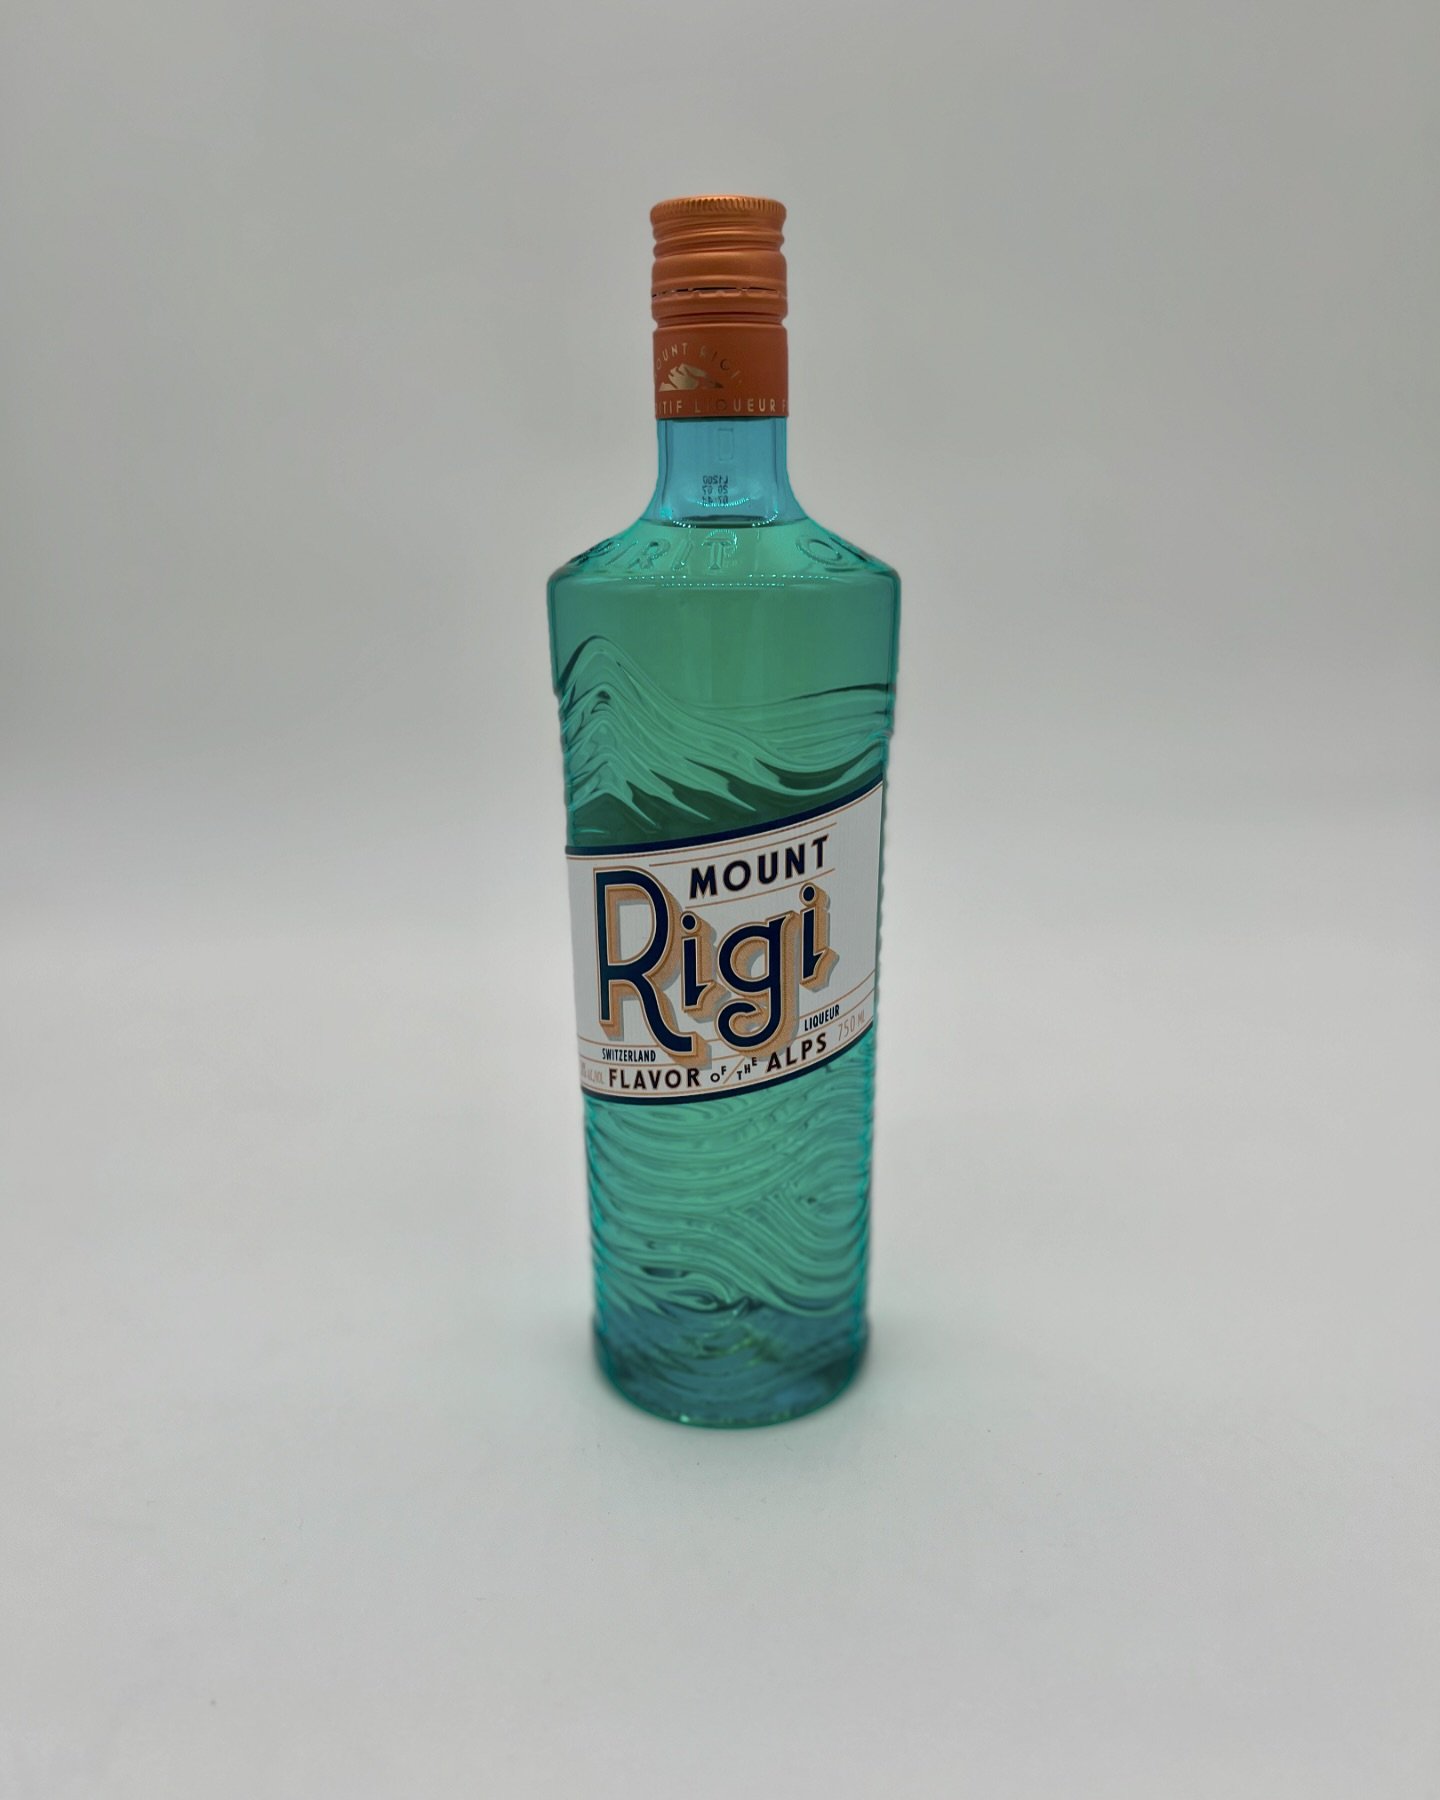 NEW! Experience the captivating flavors of Mount Rigi Liqueur, a taste of Swiss alpine perfection.